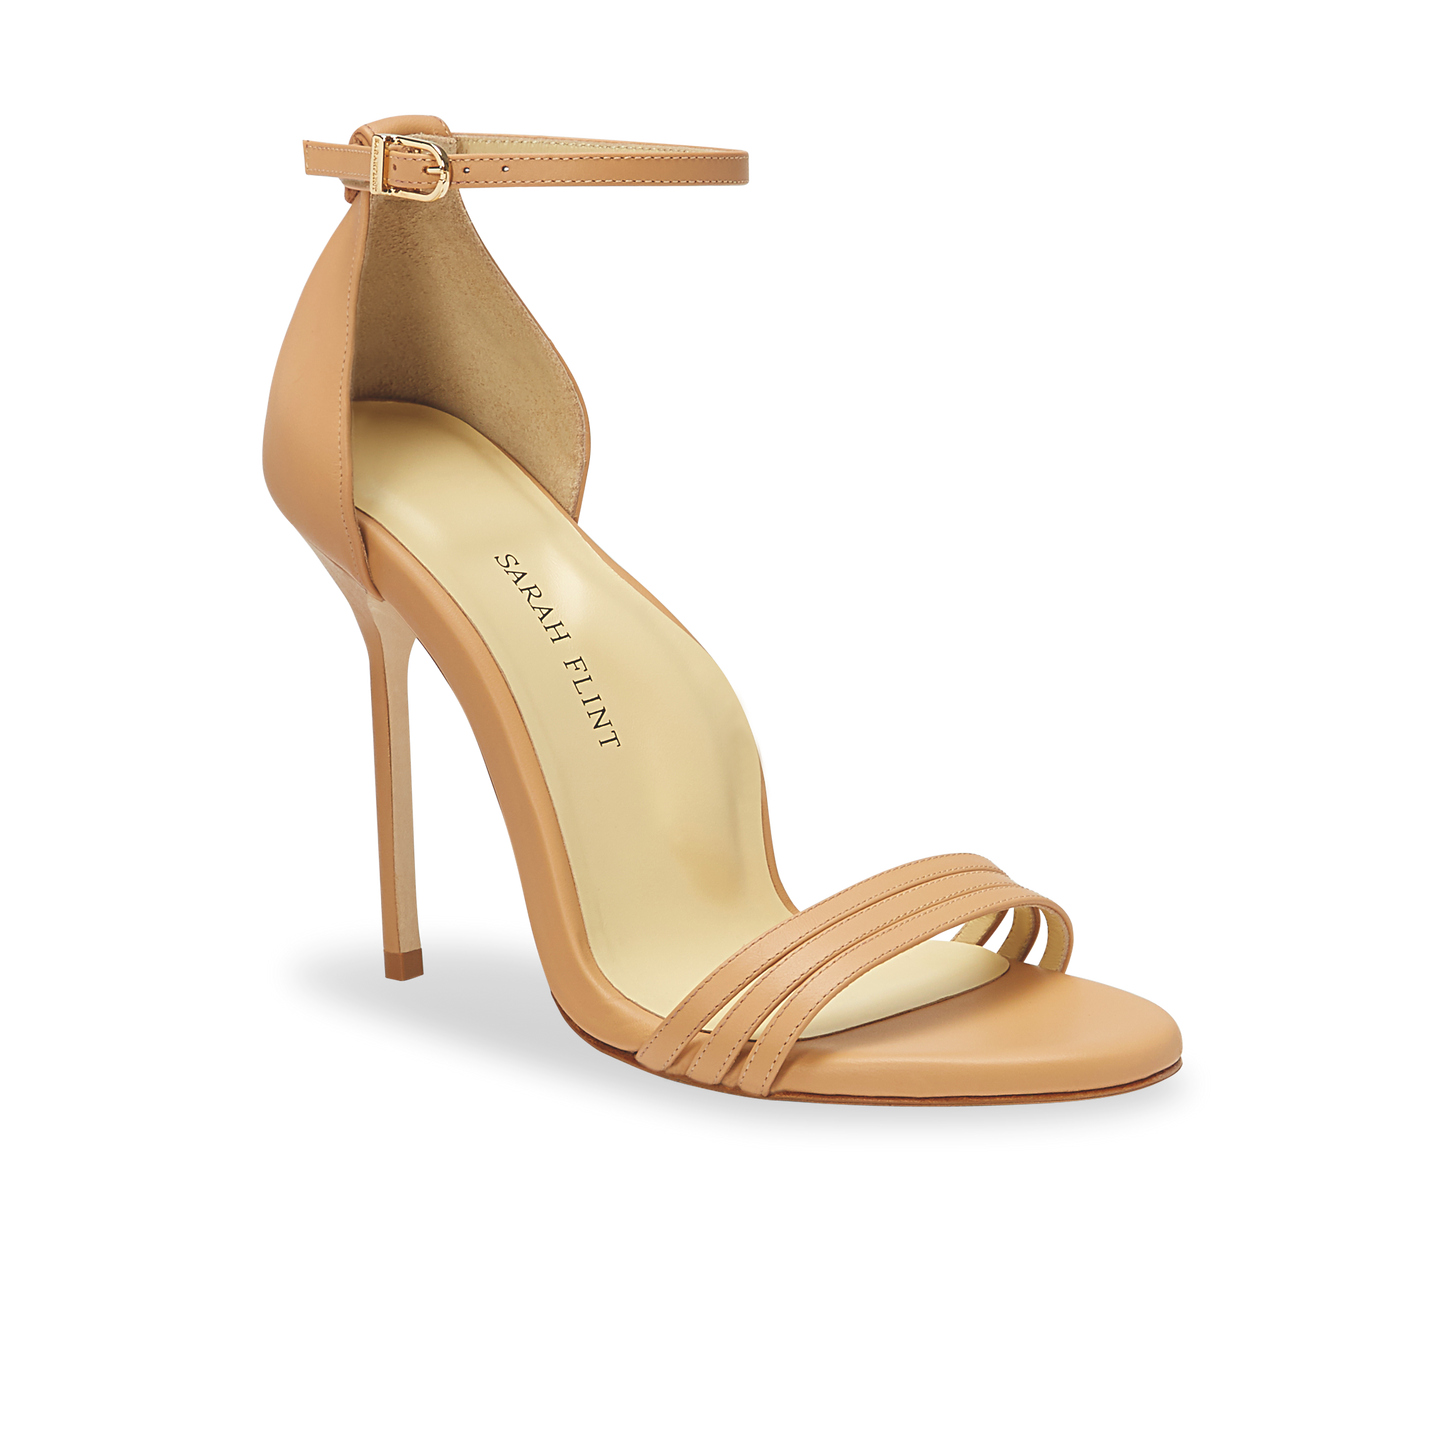 100mm Italian Made Pointed Toe Pump in Sand Calf